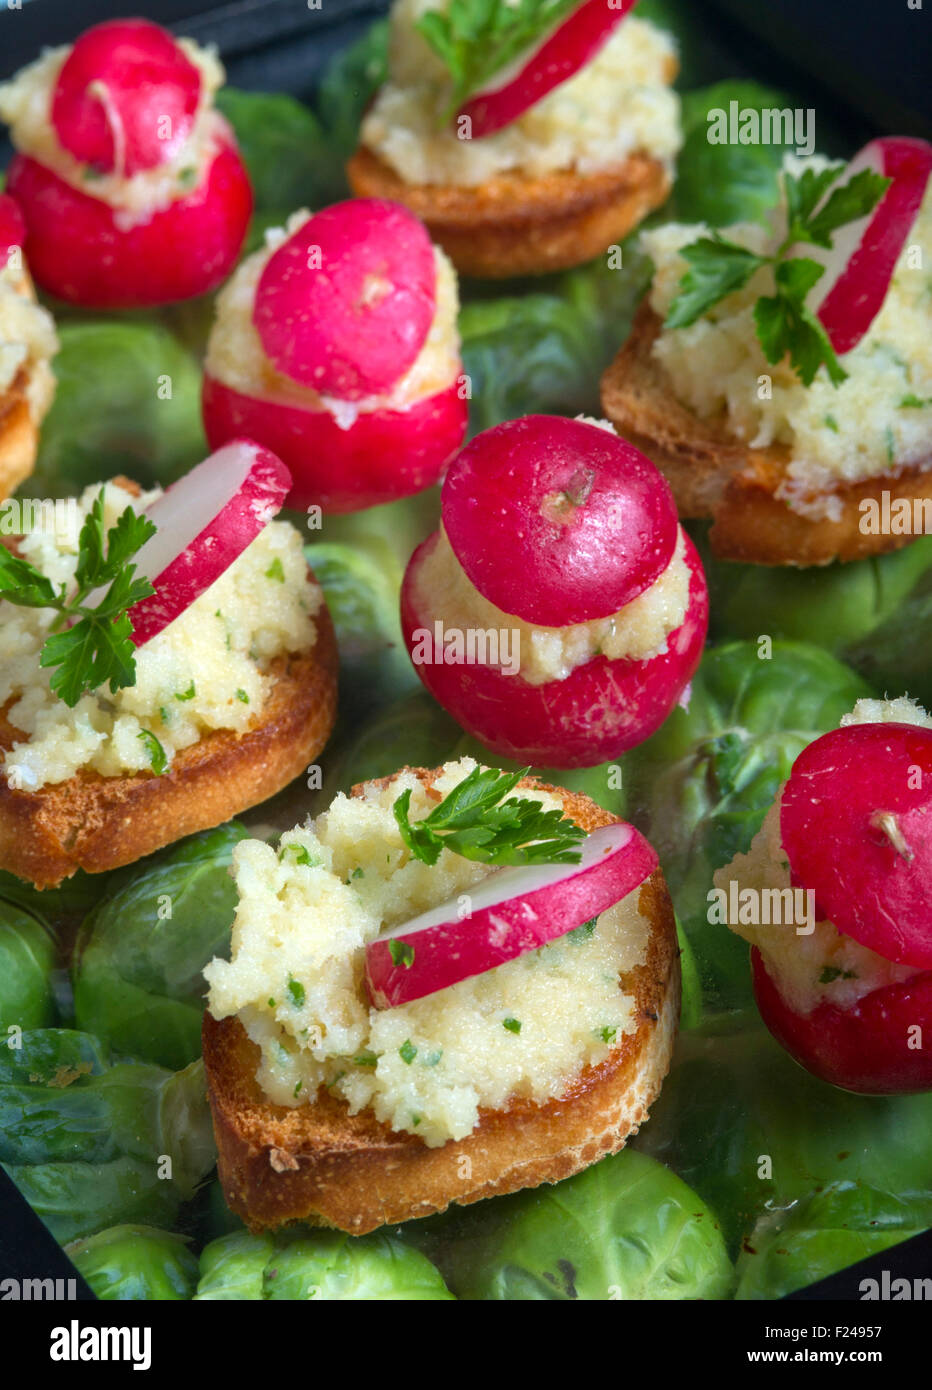 Canapes, small finger food suitable for parties. Stock Photo